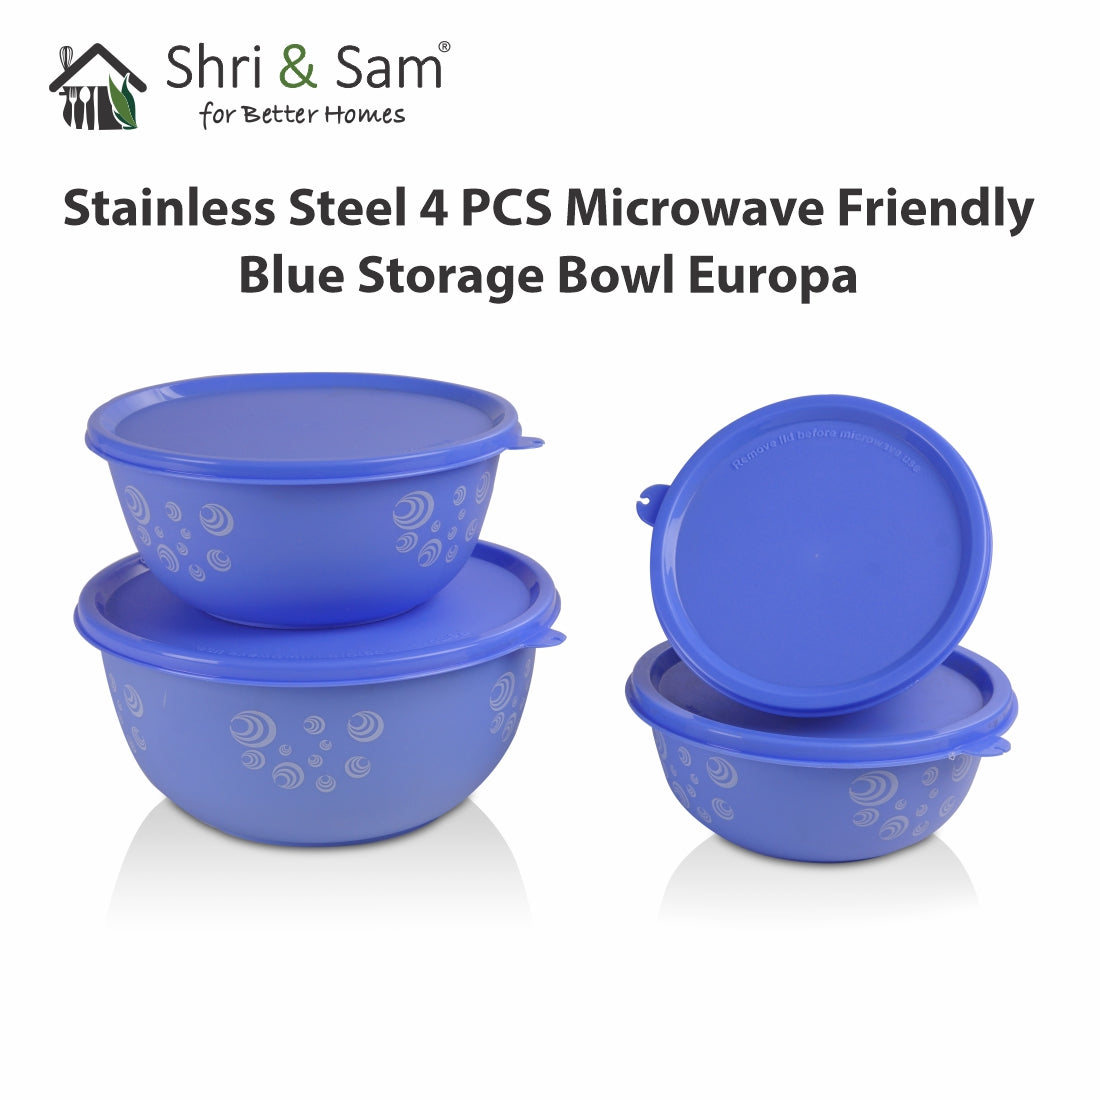 Stainless Steel 4 PCS Microwave Friendly Blue Storage Bowl Europa